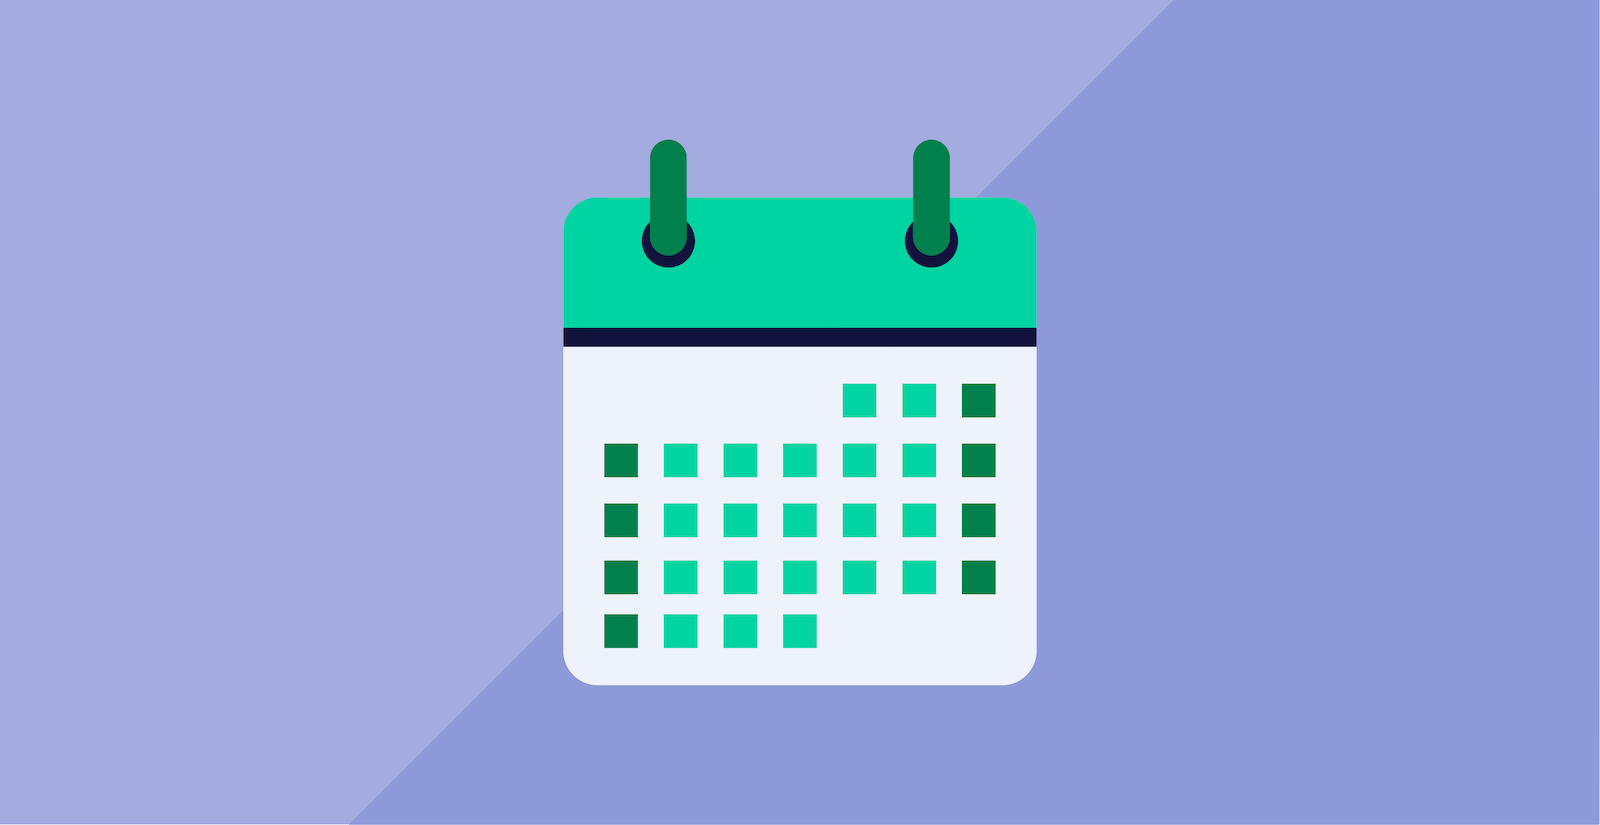 Green calendar in front of a light blue background